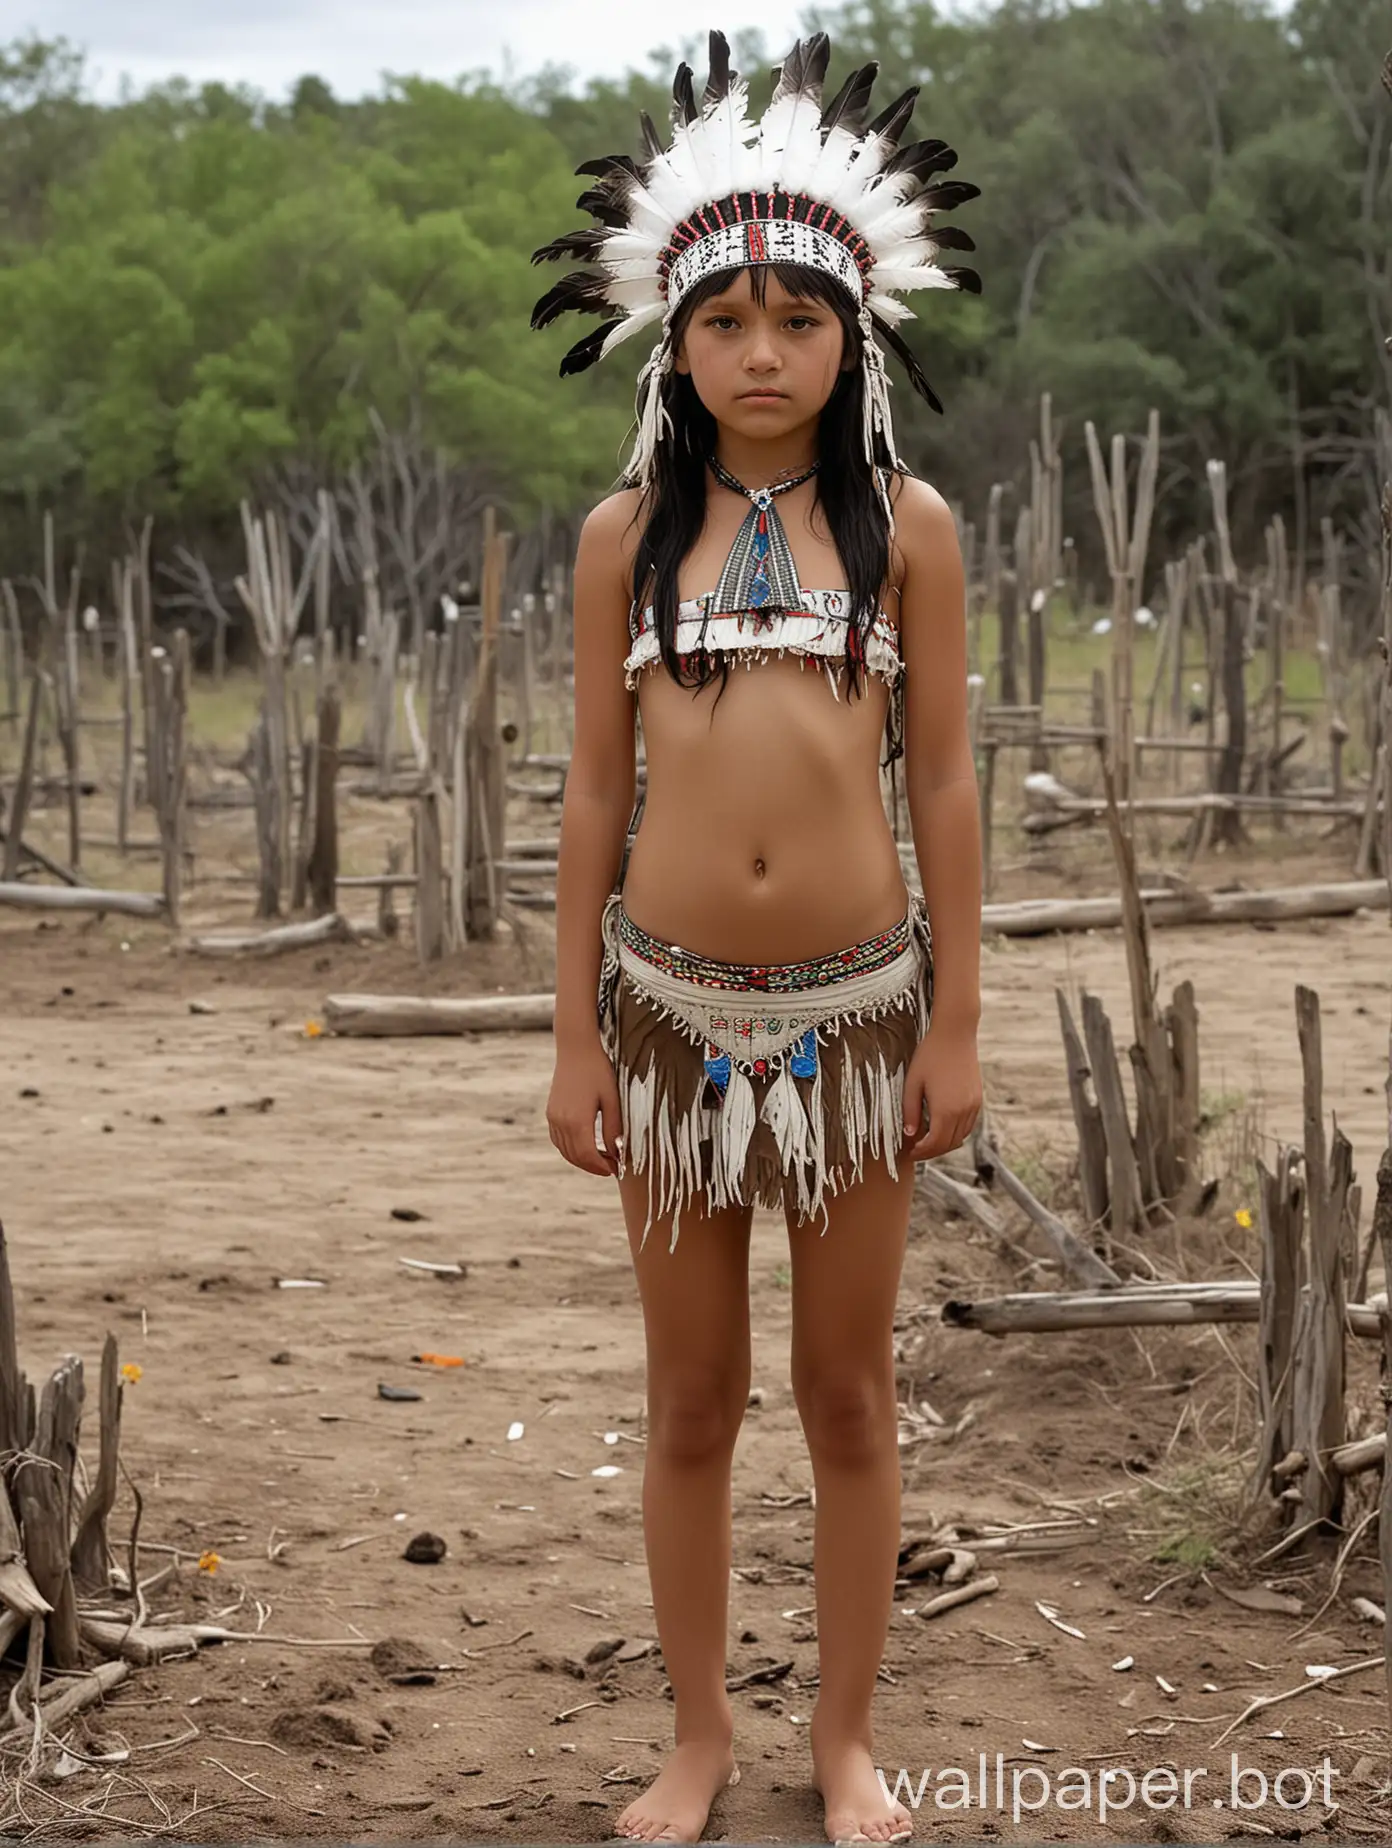 12 year old native American girl black hair black eyes wearing headdress a small mini skirt and a native bikini top with little perky breasts and standing in a native American burial ground 